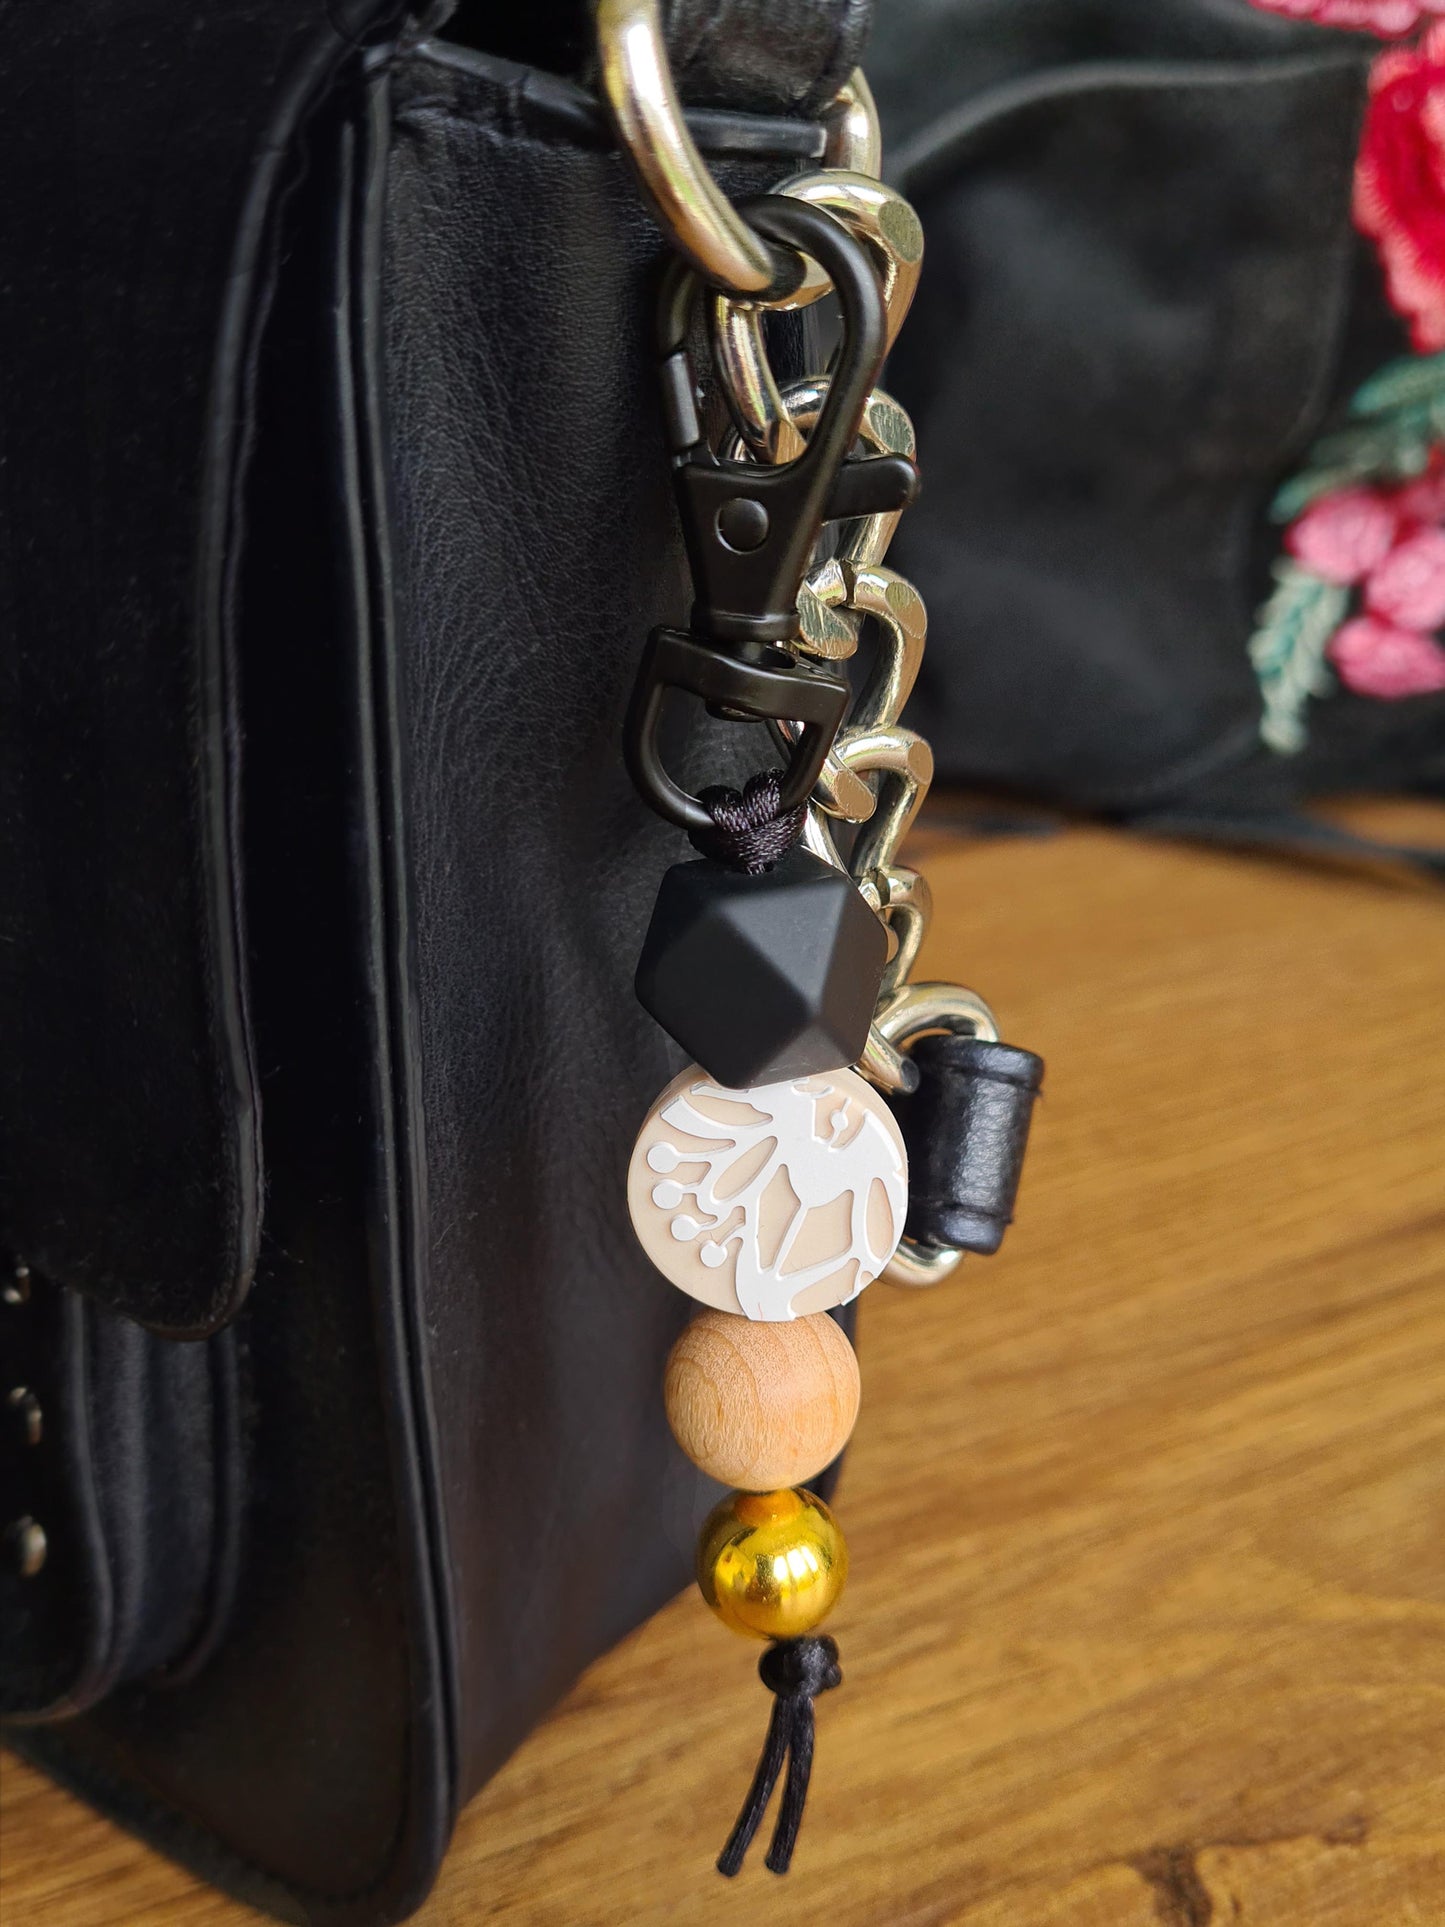 Our stylish keychains can be attached to baby changing bags, backpacks or to your keys! With the flexible design, they are easy to grip and use as zip pullers. 